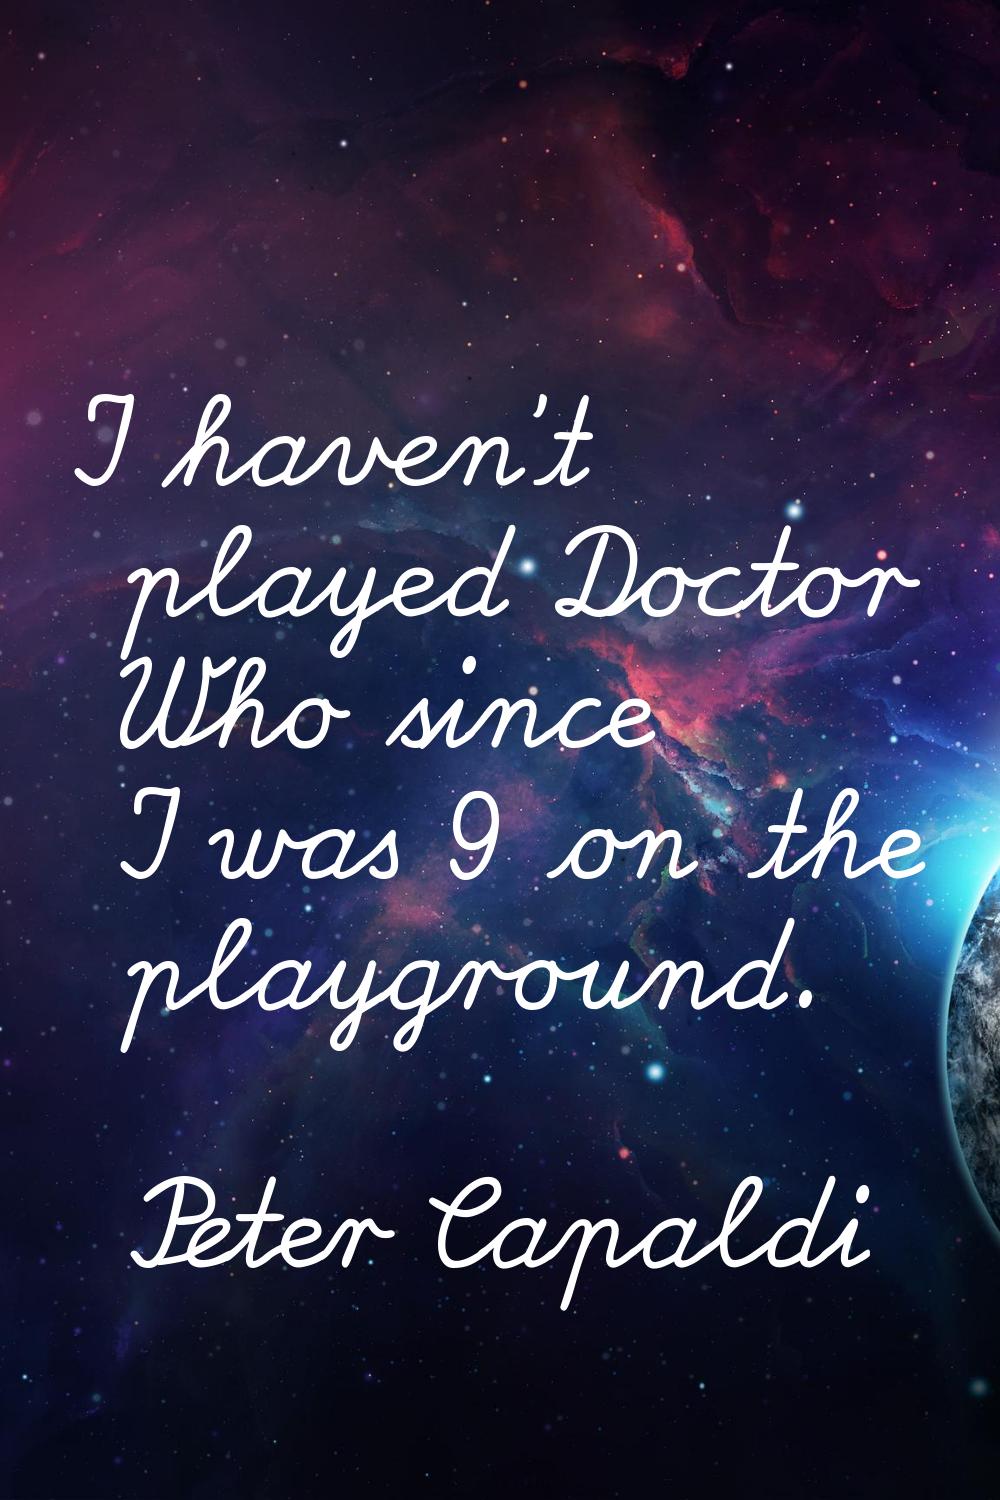 I haven't played Doctor Who since I was 9 on the playground.